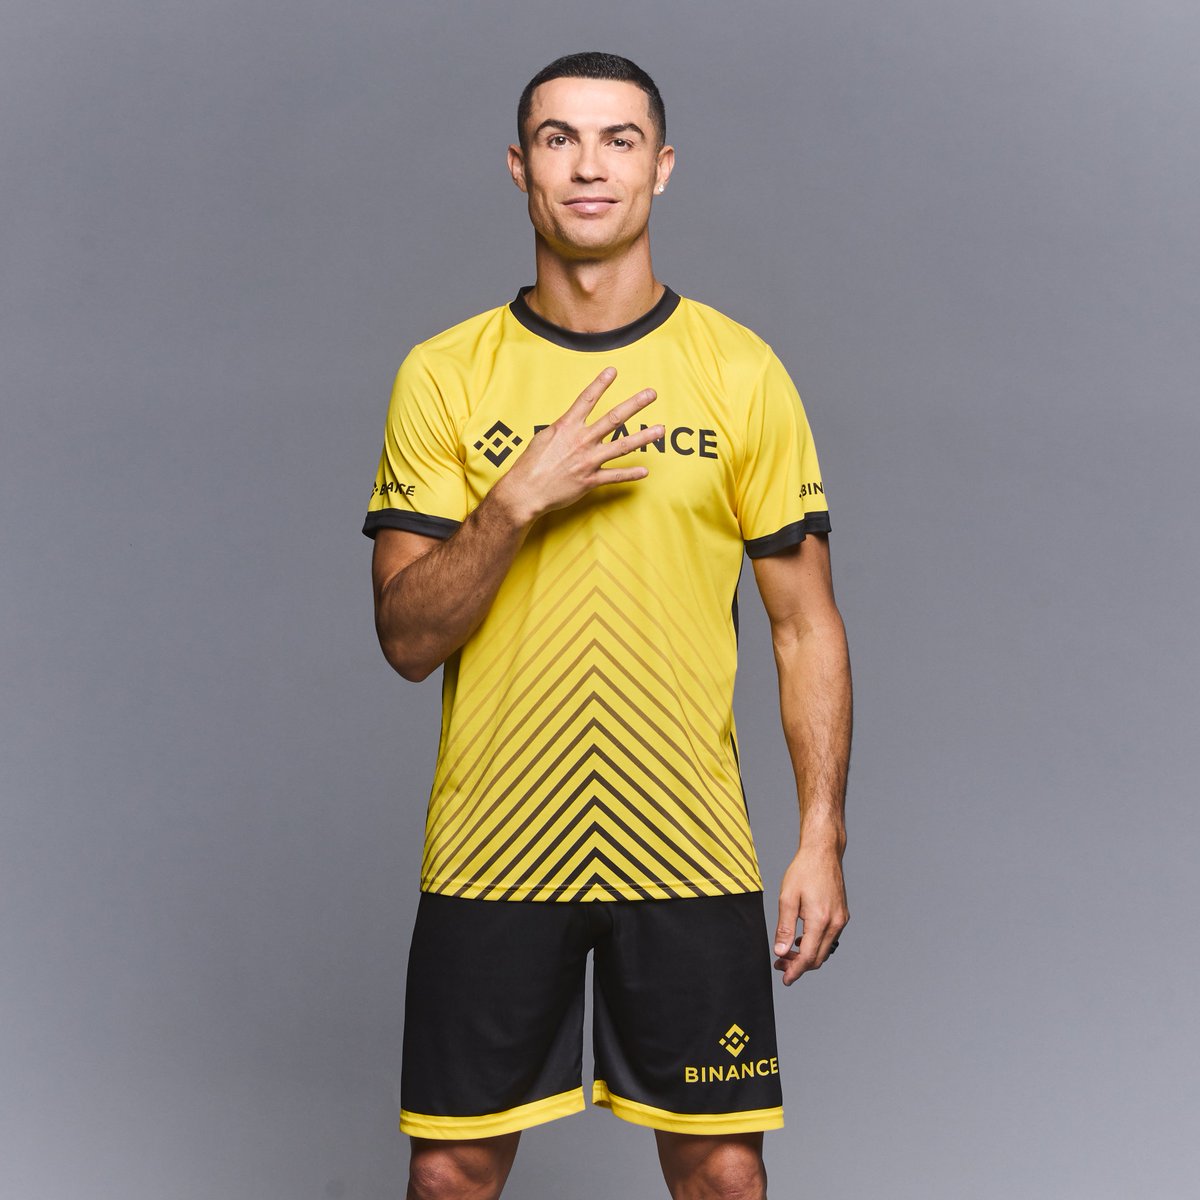 A @Cristiano Ronaldo NFT Collection made 4 you is kicking off soon on #Binance Are you ready? Find out more 👉 binance.com/en/blog/all/st…